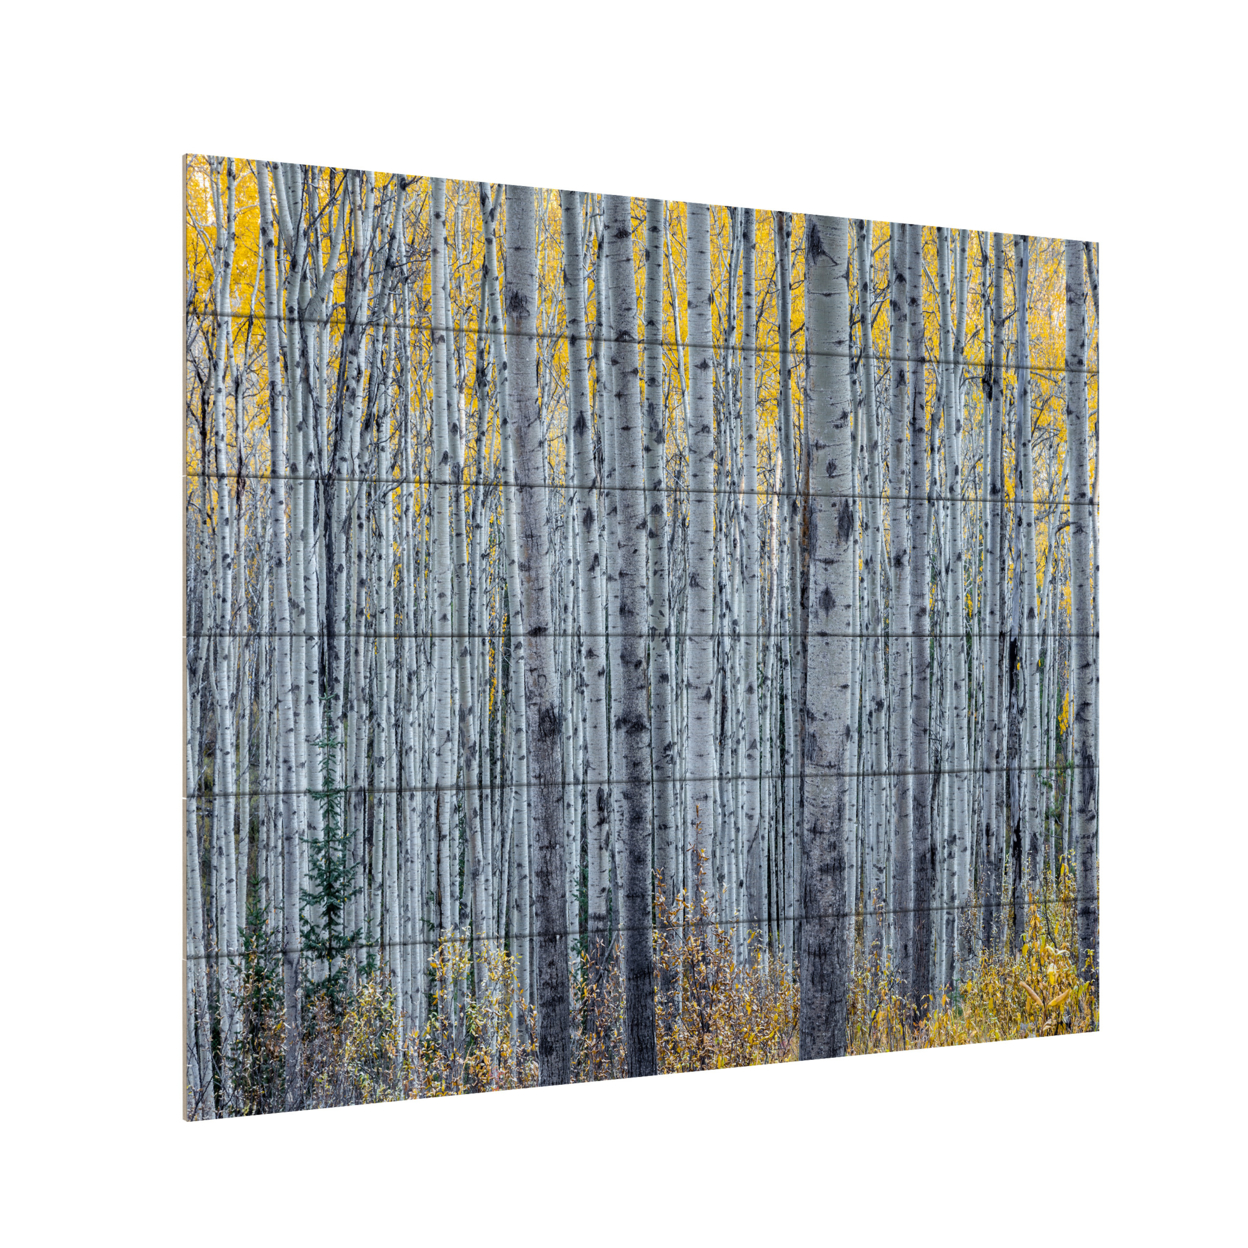 Wooden Slat Art 18 X 22 Inches Titled Forest Of Aspen Trees Ready To Hang Home Decor Picture